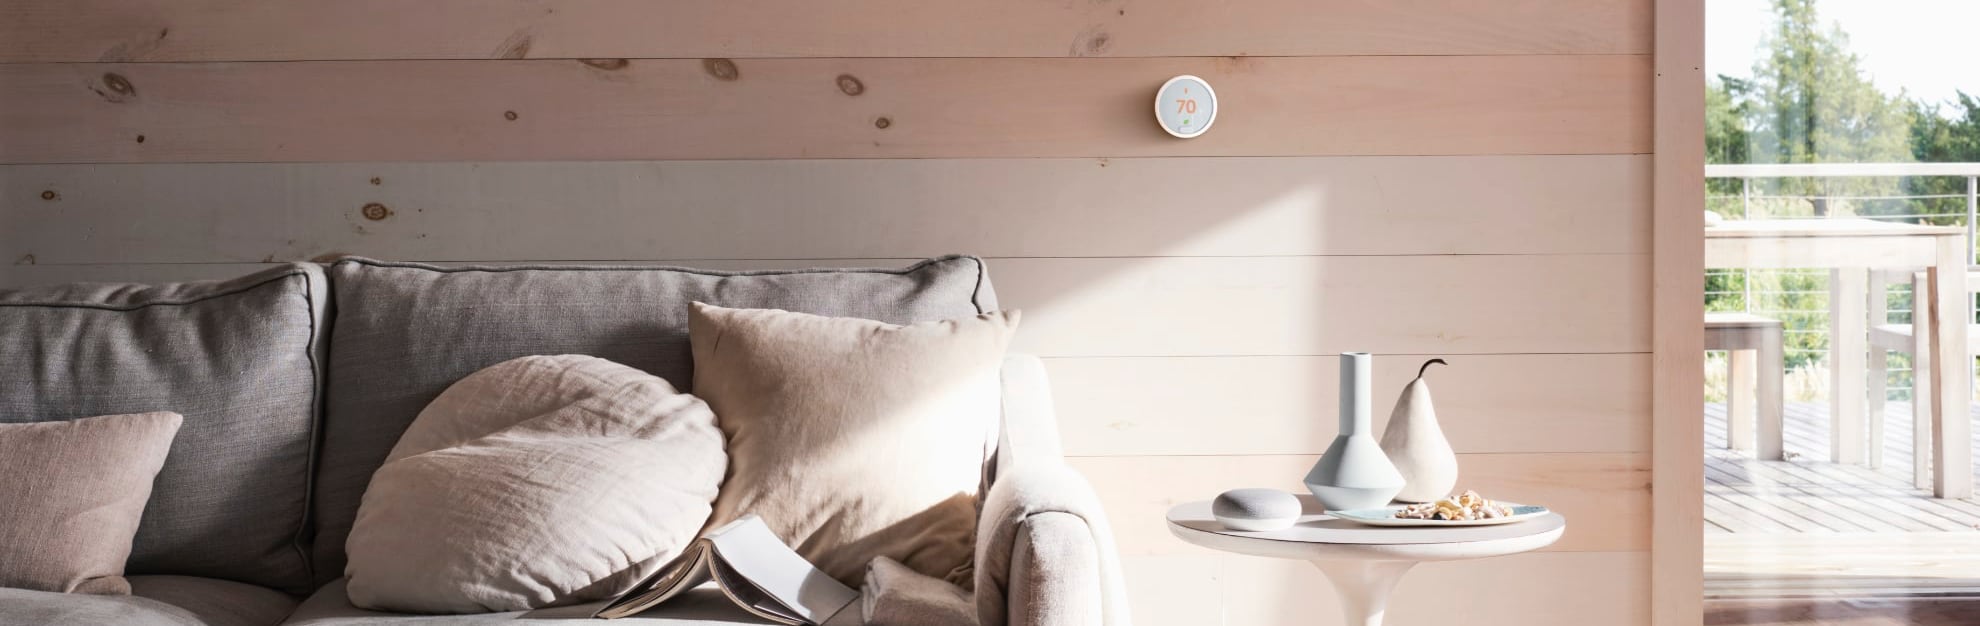 Vivint Home Automation in Dallas